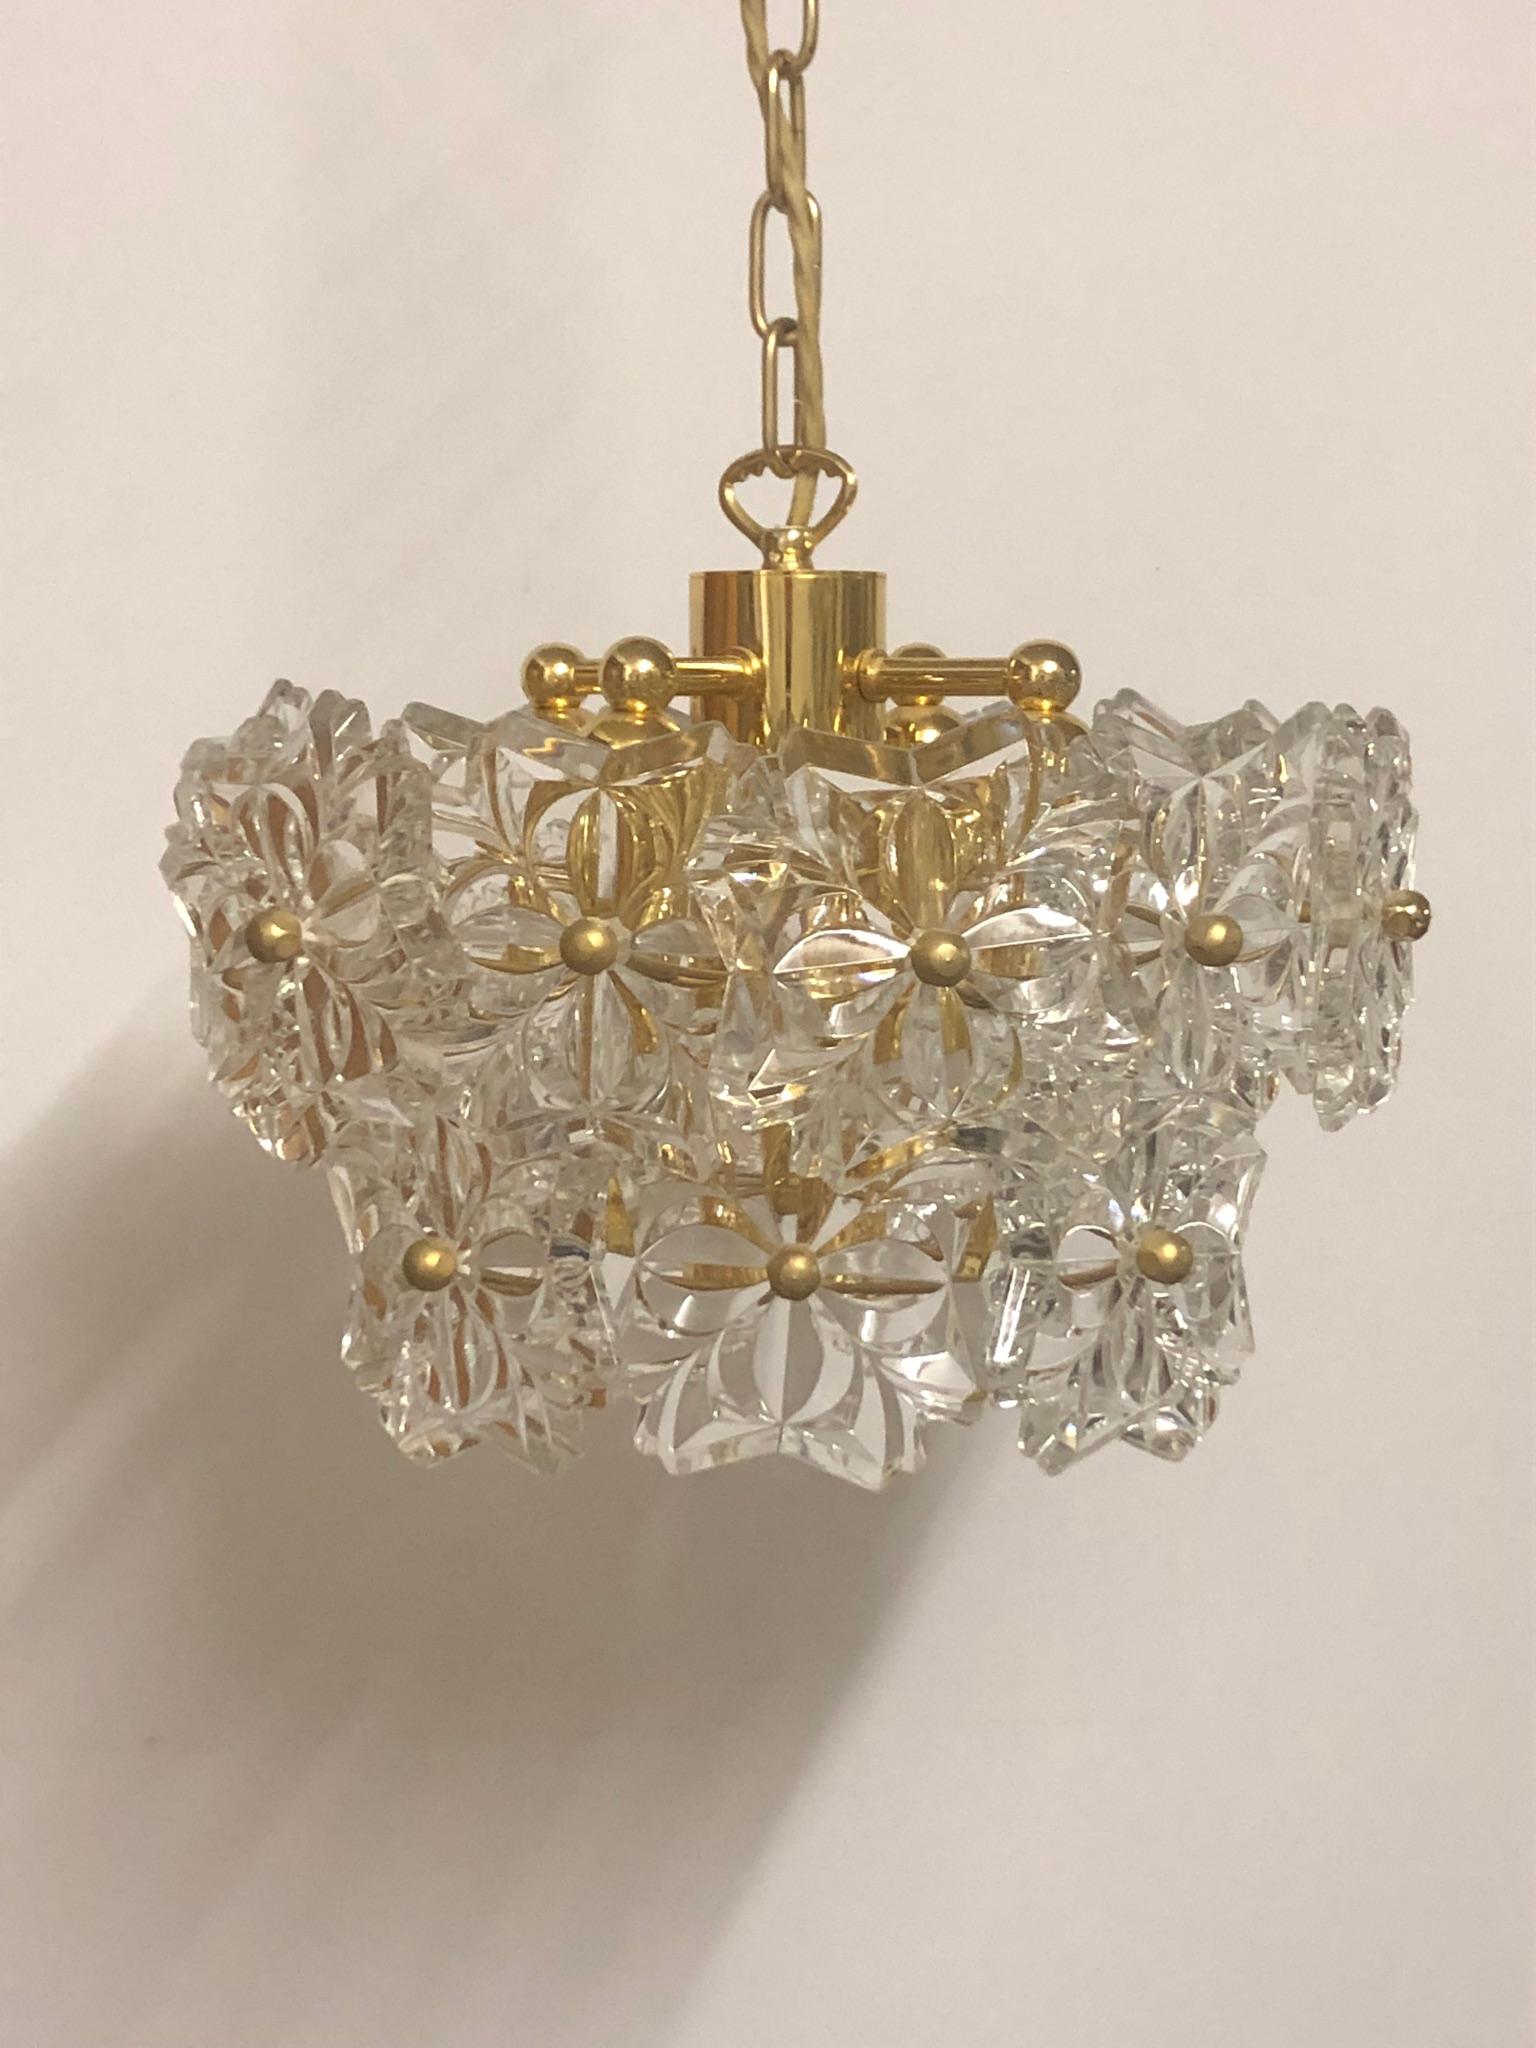 Wonderful Mid-Century Modern, high quality crystal chandelier by Kinkeldey, Germany, circa 1960s. This chandelier is made of
flower crystal elements and brass frame.
Socket: 4 x E14 and 1 x E27 (Edison) for standard screw bulbs.
Perfect condition.